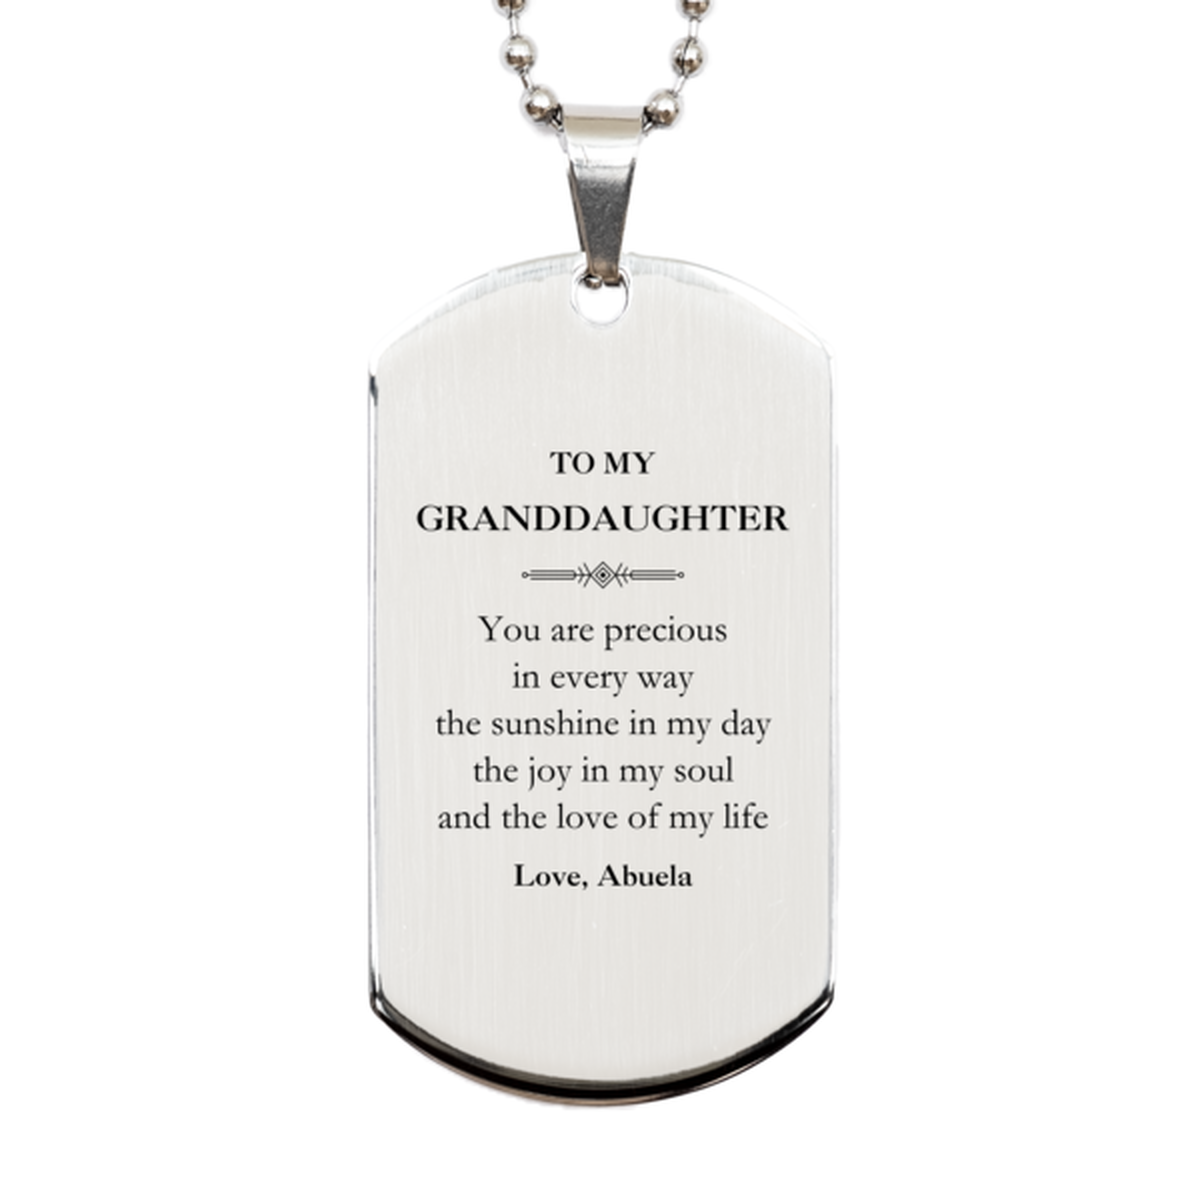 Graduation Gifts for Granddaughter Silver Dog Tag Present from Abuela, Christmas Granddaughter Birthday Gifts Granddaughter You are precious in every way the sunshine in my day. Love, Abuela